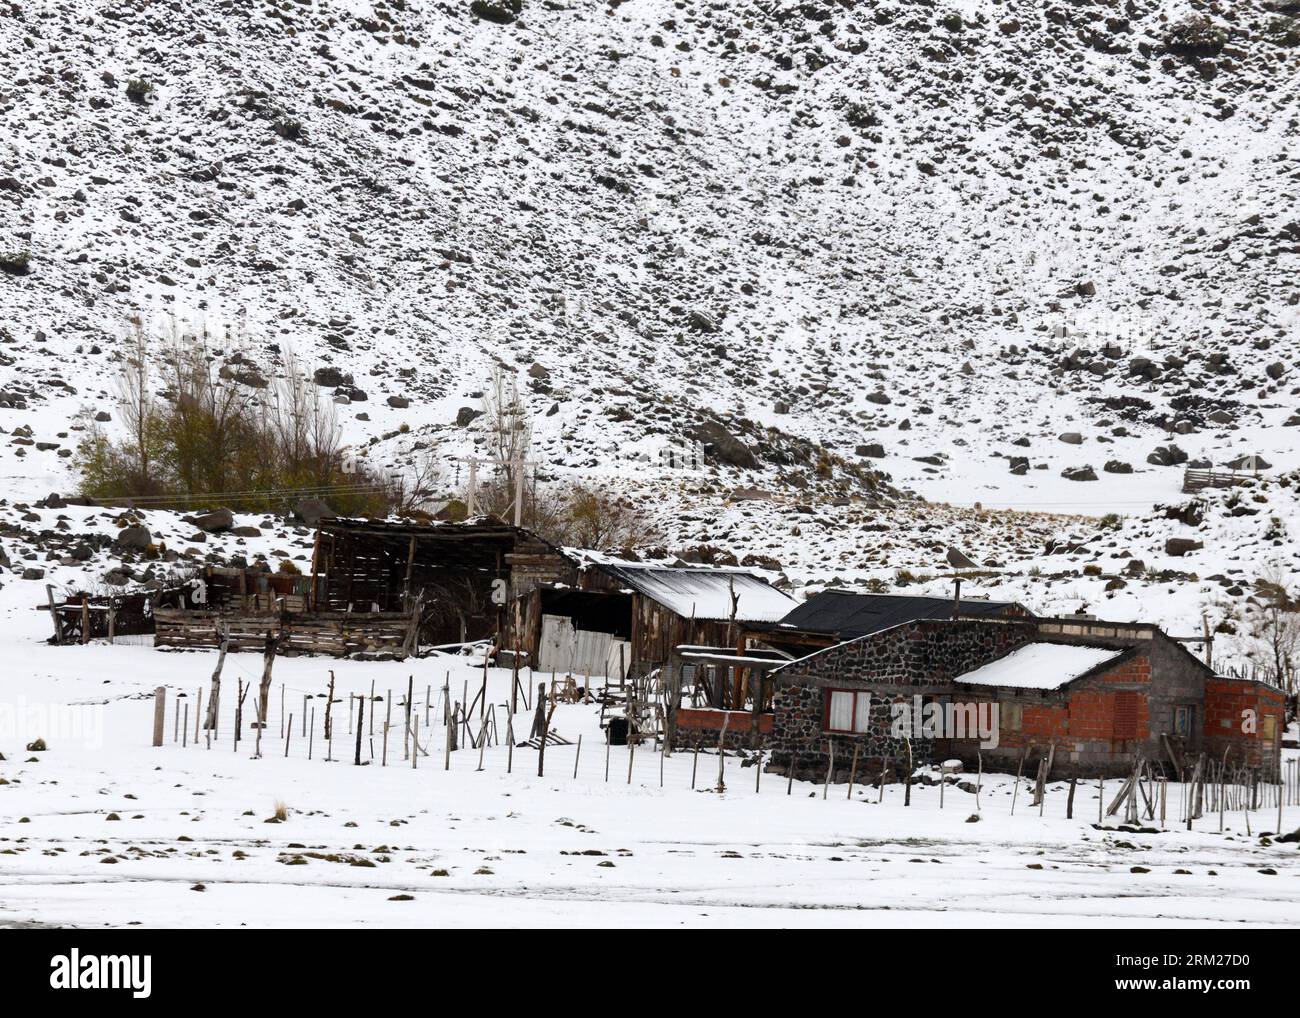 Bildnummer: 59723014  Datum: 28.05.2013  Copyright: imago/Xinhua (130529) -- NEUQUEN, May 28, 2013 (Xinhua) -- Houses covered with snow are seen in the rural area of Caviahue, close to Copahue volcano, which is on maximum alert of possible eruption, at the border locality of Caviahue-Copahue, in the Neuquen province, Argentina, May 28, 2013. Chilean and Argentine authorities declared red alert on an eventual eruption, and evacuation started on both sides. (Xinhua/Pepe Delloro/TELAM) ARGENTINA-NEUQUEN-ENVIRONMENT-VOLCANO PUBLICATIONxNOTxINxCHN xcb x0x 2013 quer     59723014 Date 28 05 2013 Copy Stock Photo